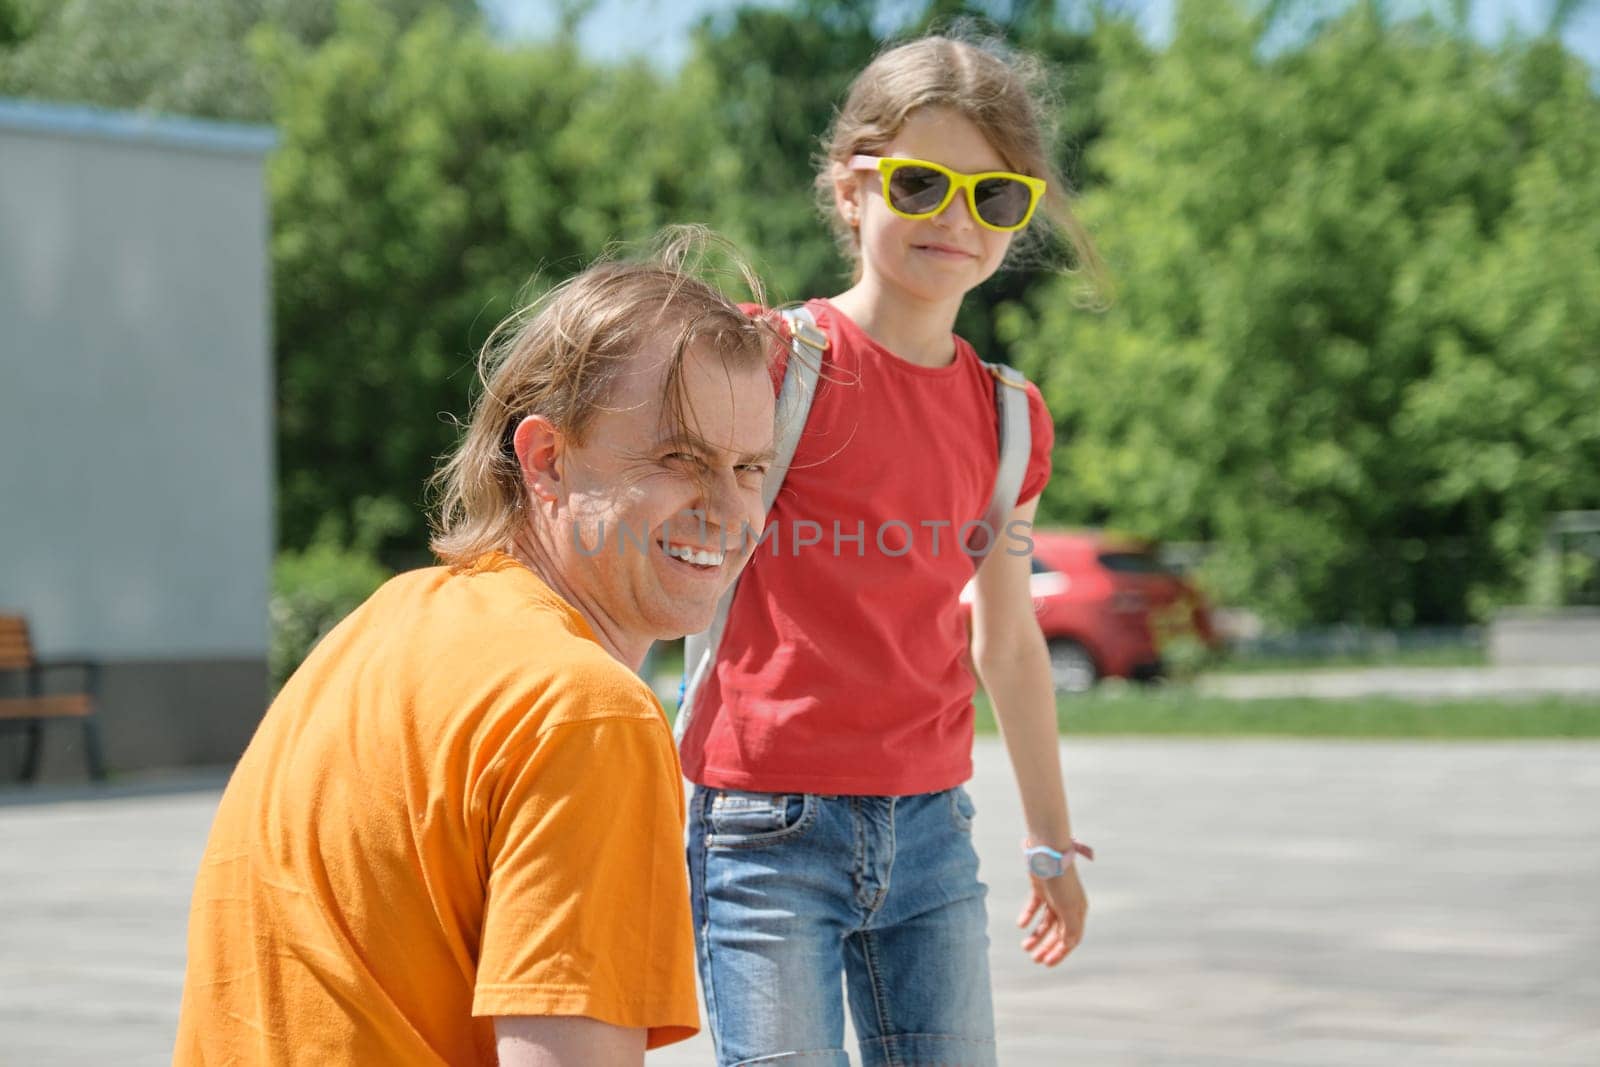 Outdoor summer portrait of father and daughter, happy smiling dad with child.